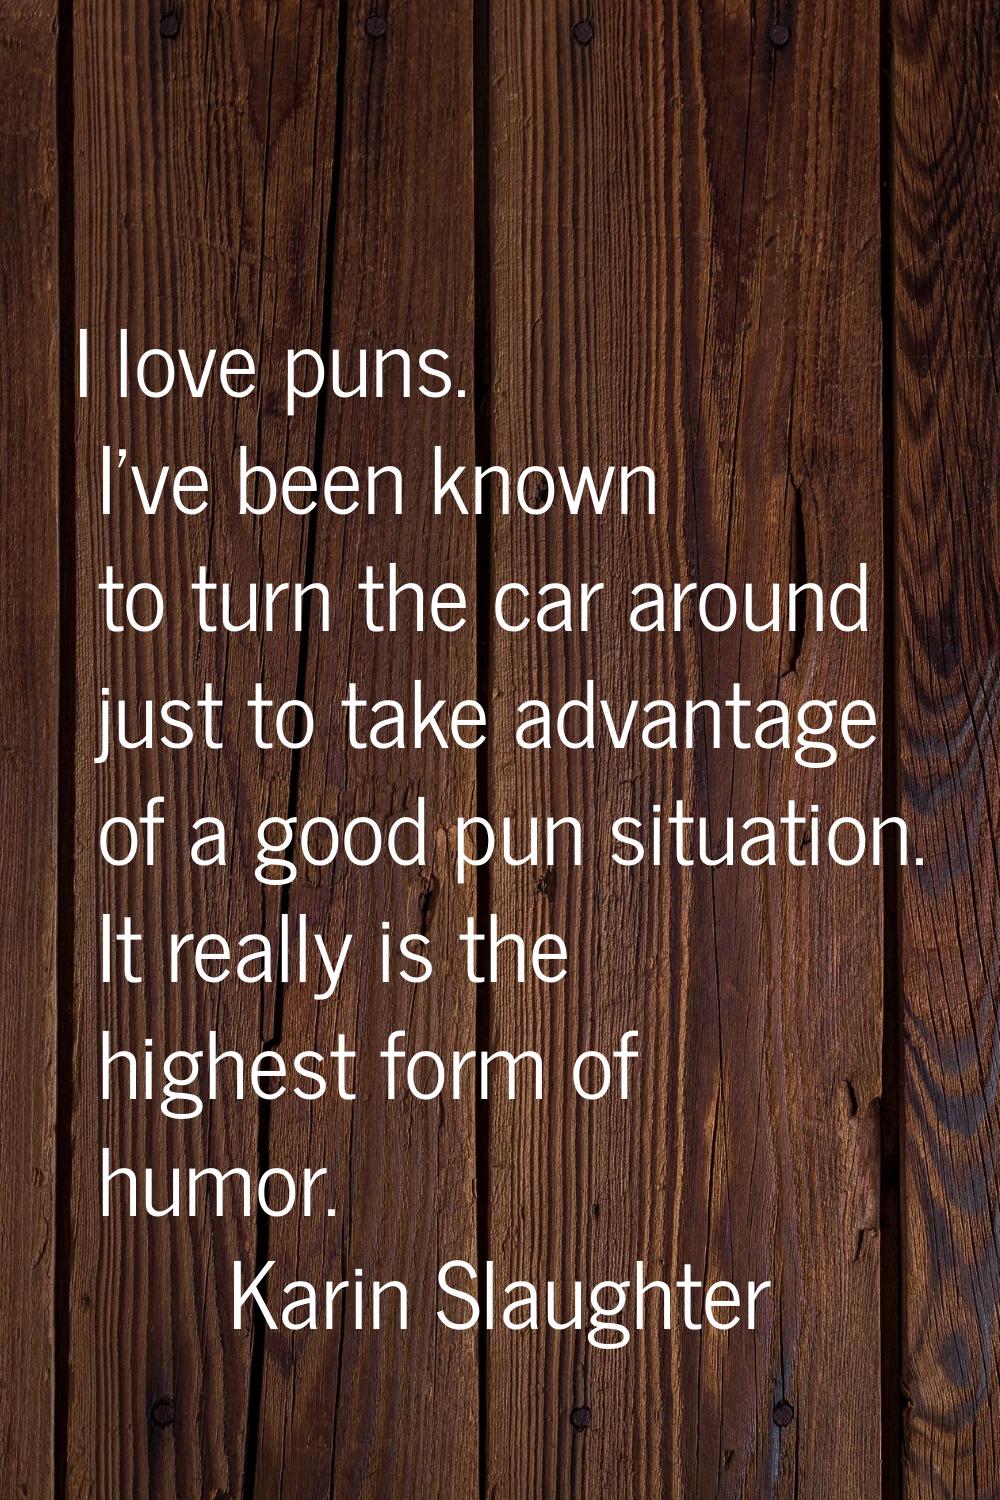 I love puns. I've been known to turn the car around just to take advantage of a good pun situation.